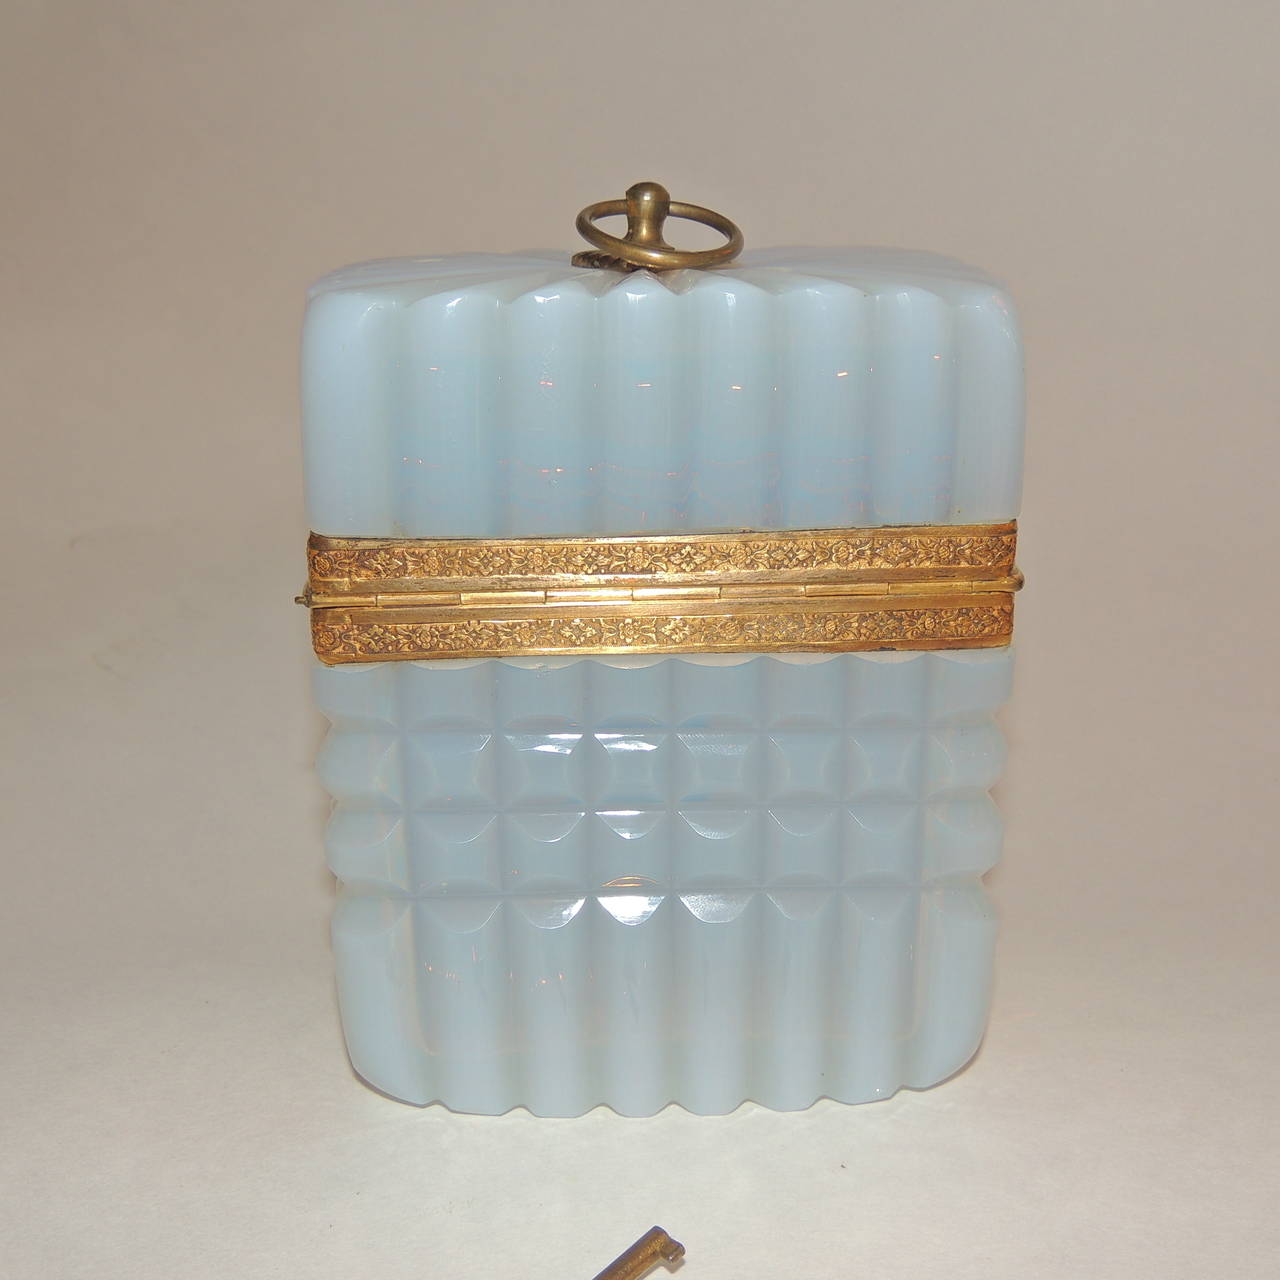 Early 20th Century Rare French White Opaline Ribbed Ormolu Dore Glass Casket Box with Key